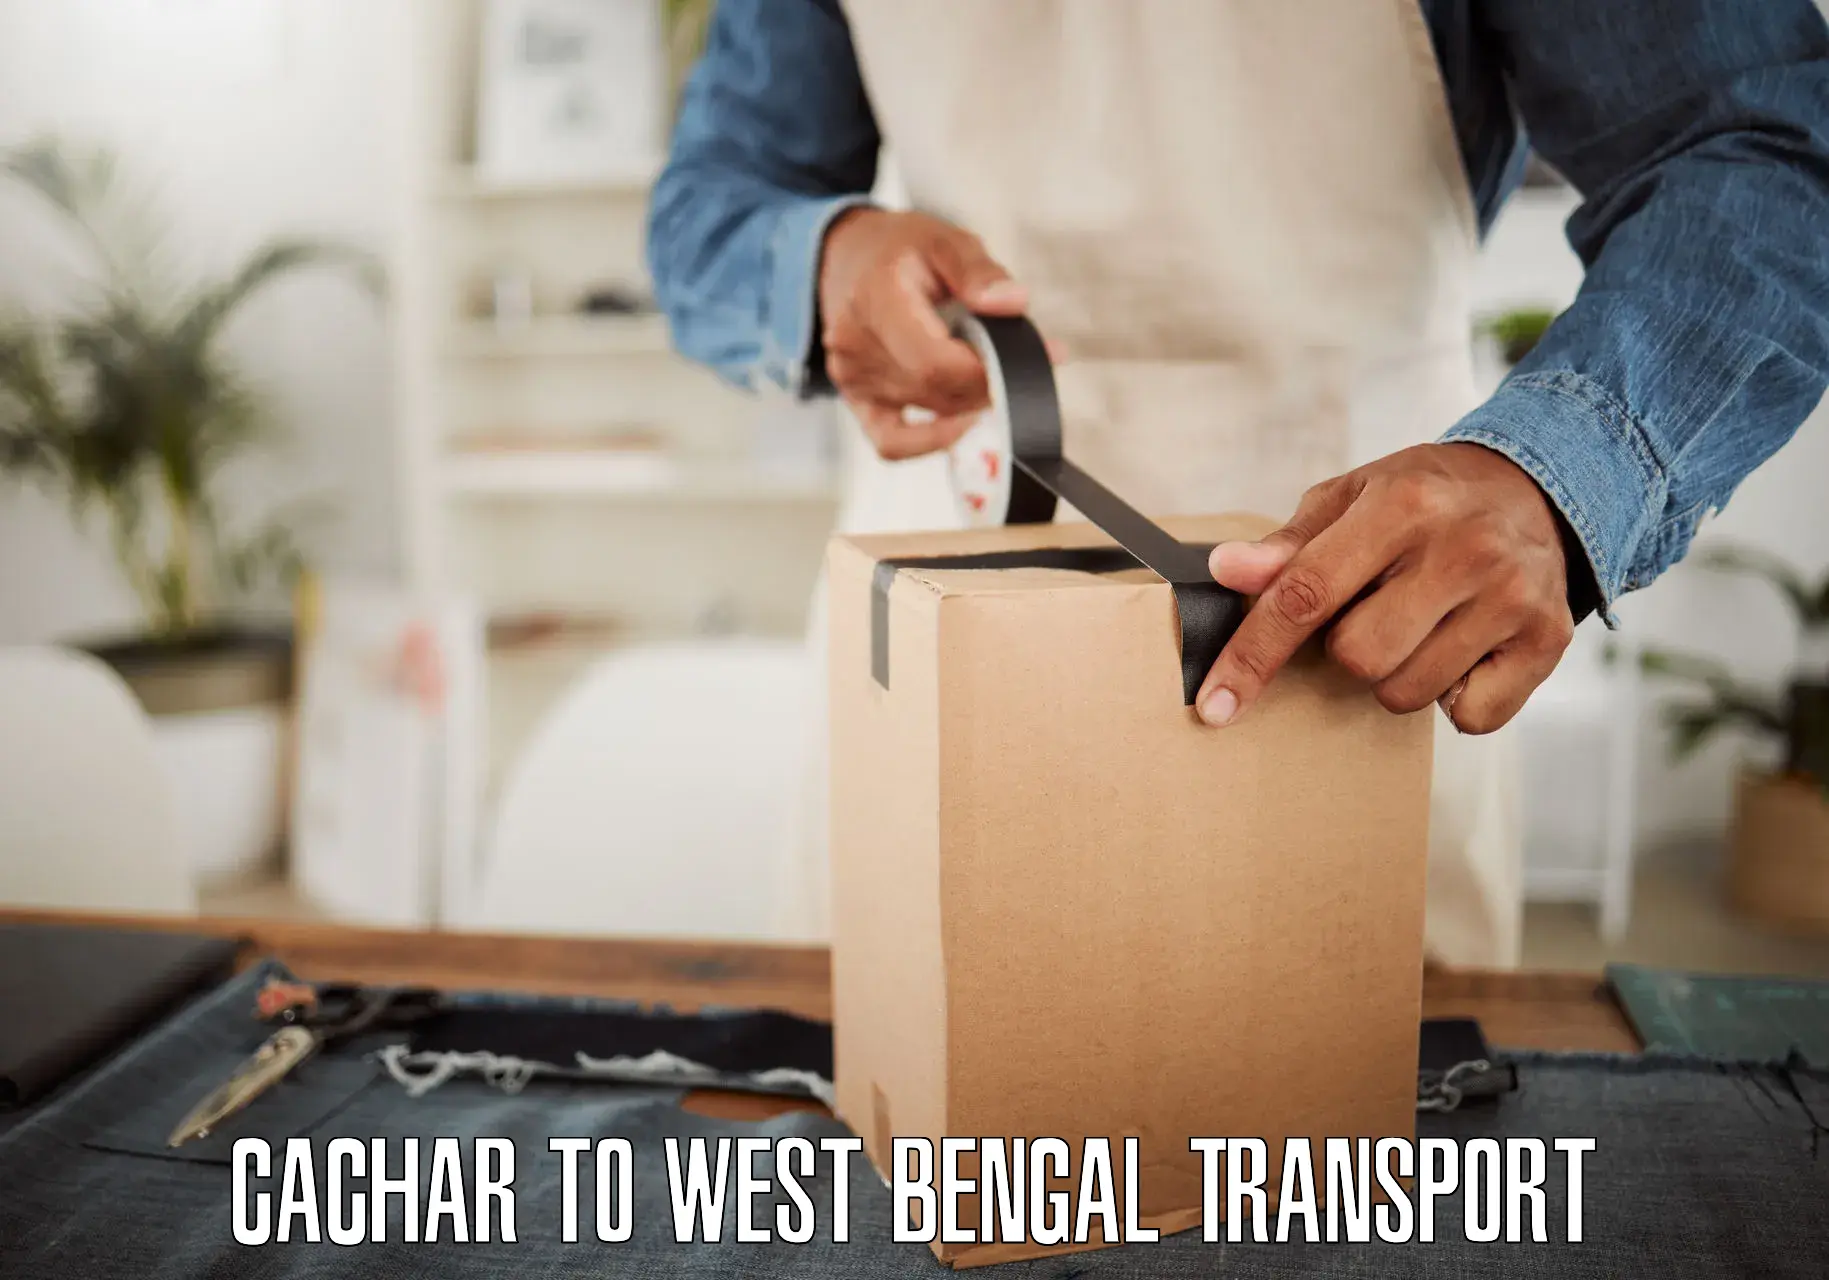 Transport in sharing Cachar to West Bengal